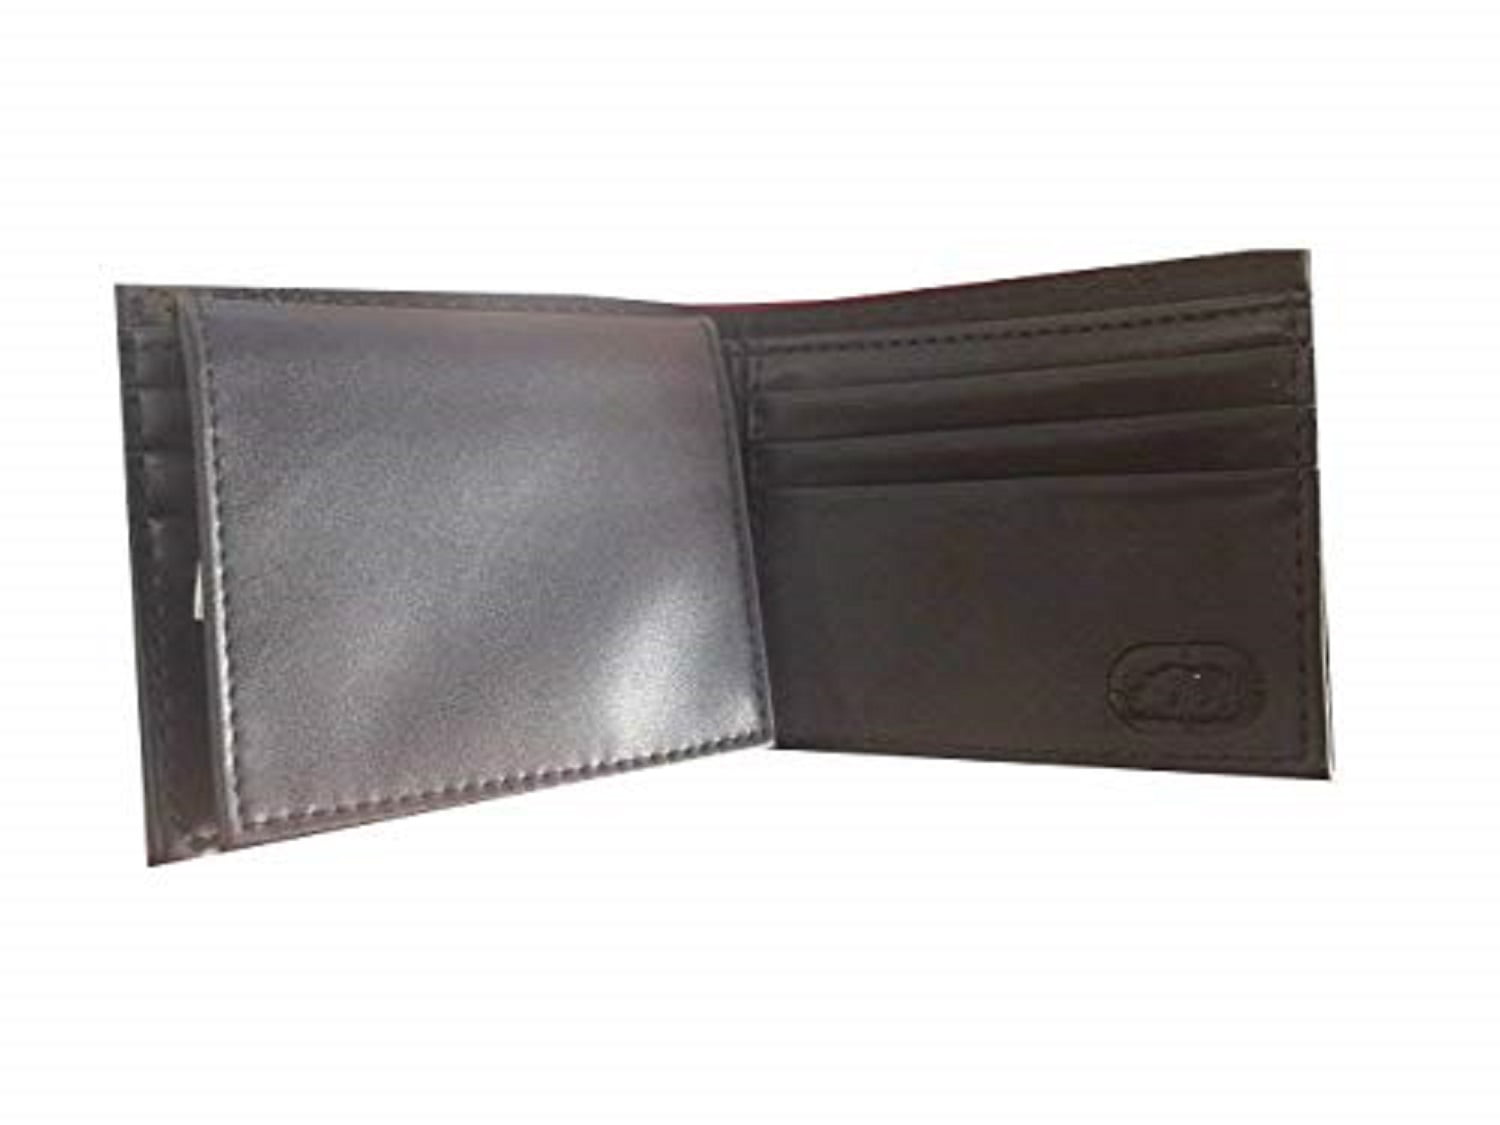 Men's Leather Wallet Essence in Black and Red – ANTORINI®